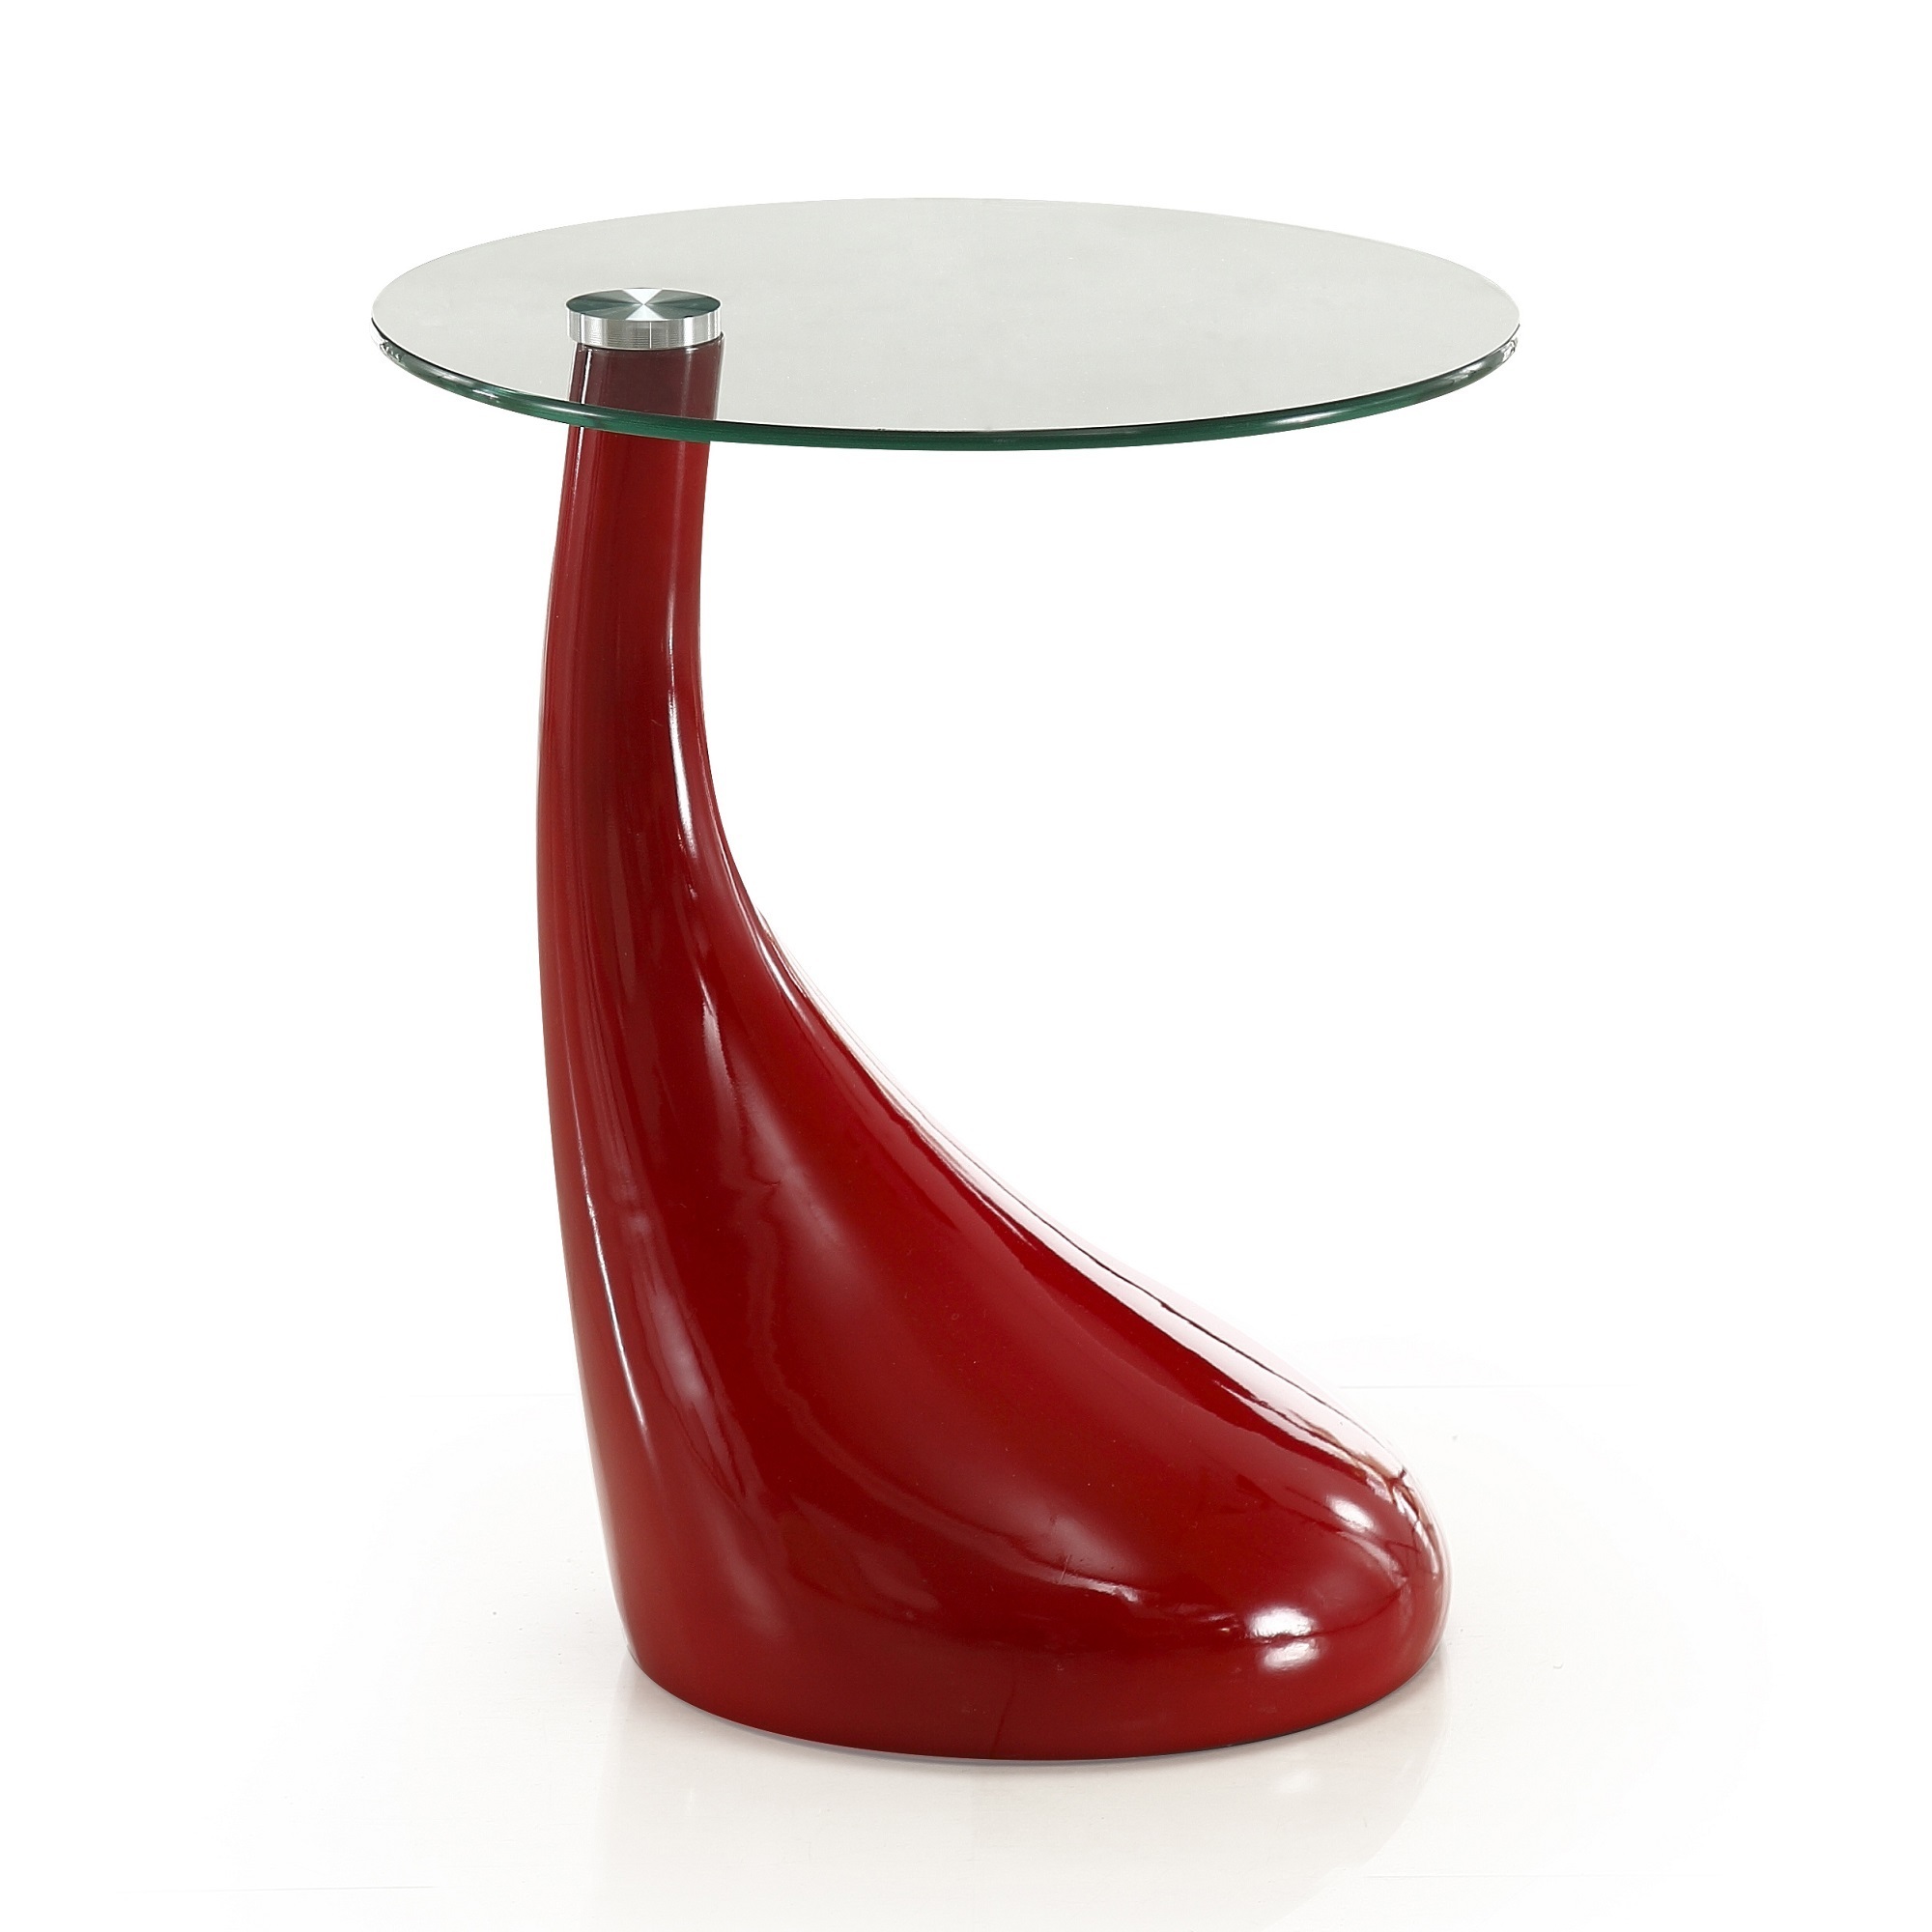 Manhattan Comfort, Lava 19.7Inch Red Glass Top Accent Table, Width 19.7 in, Height 20.9 in, Depth 19.7 in, Model ET003